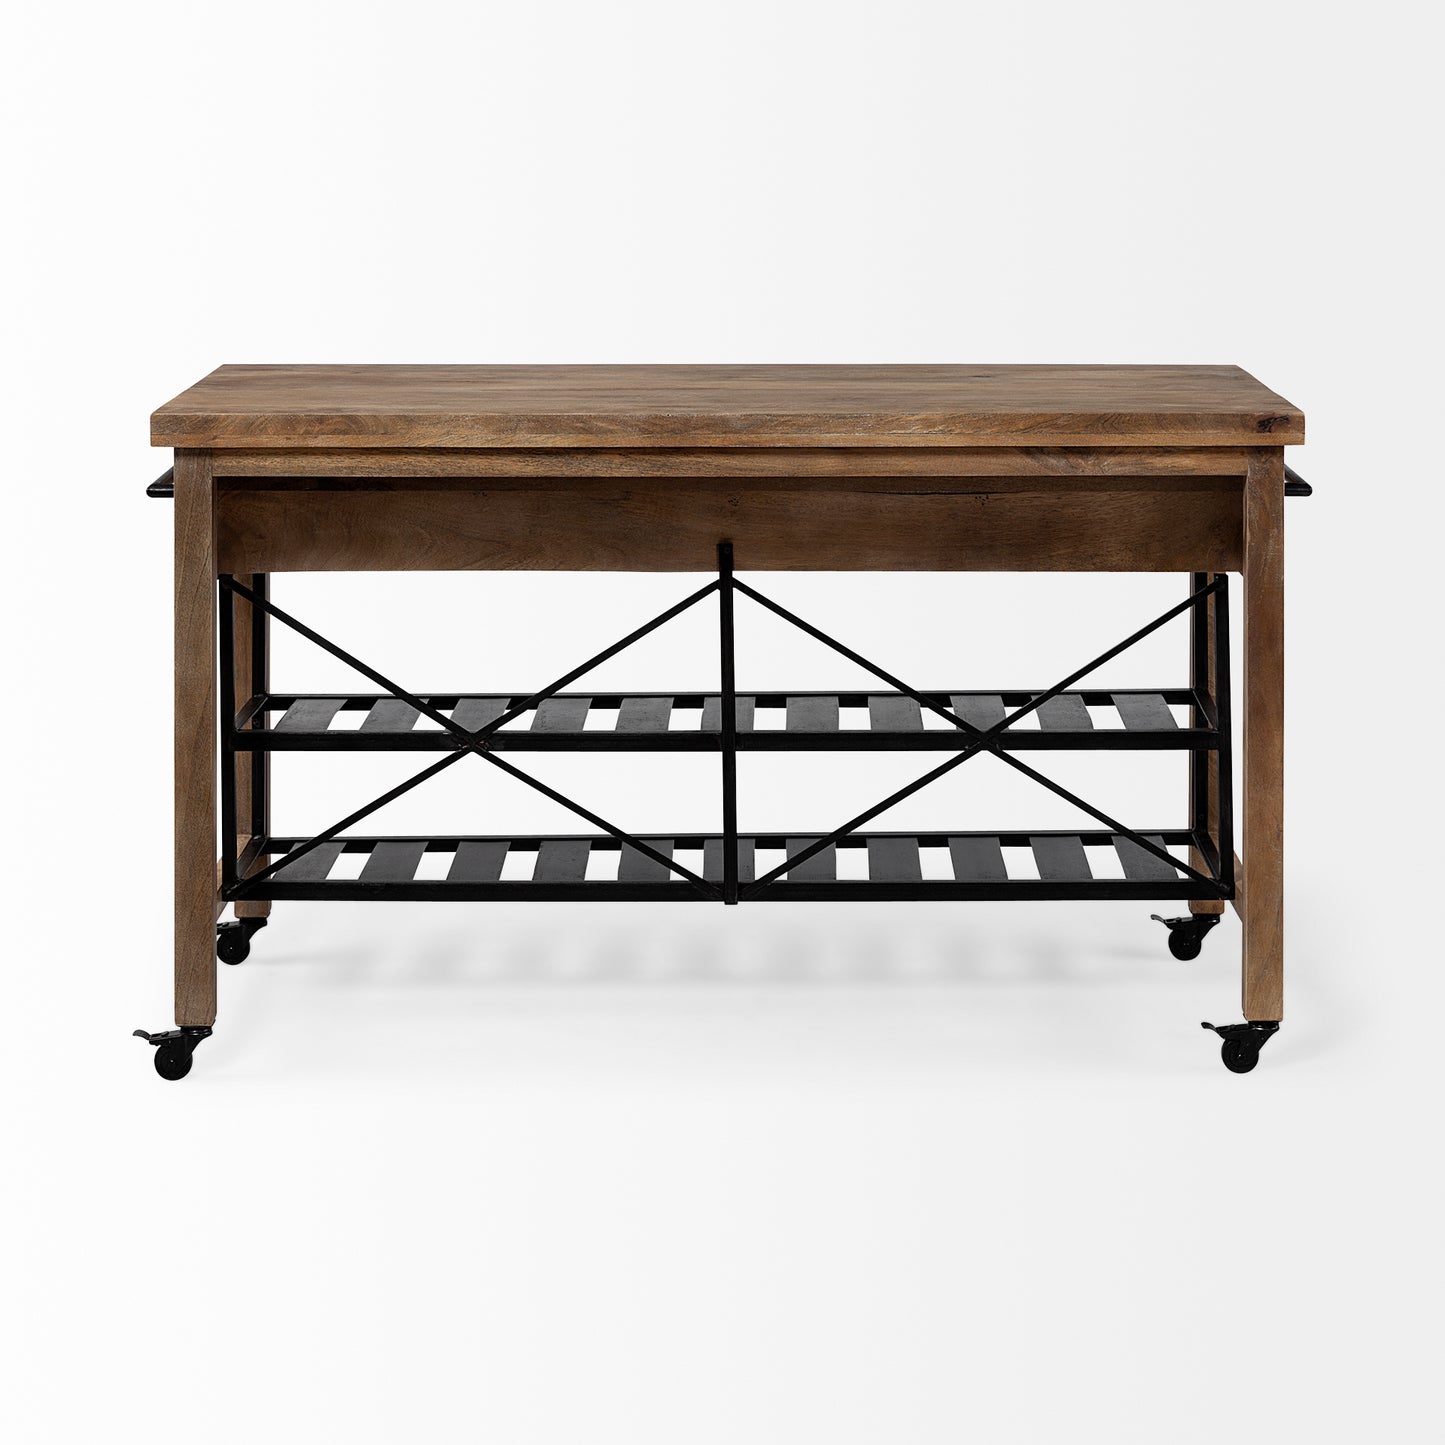 Brown Solid Wood Top Kitchen Island With Two Tier Black Metal Rolling